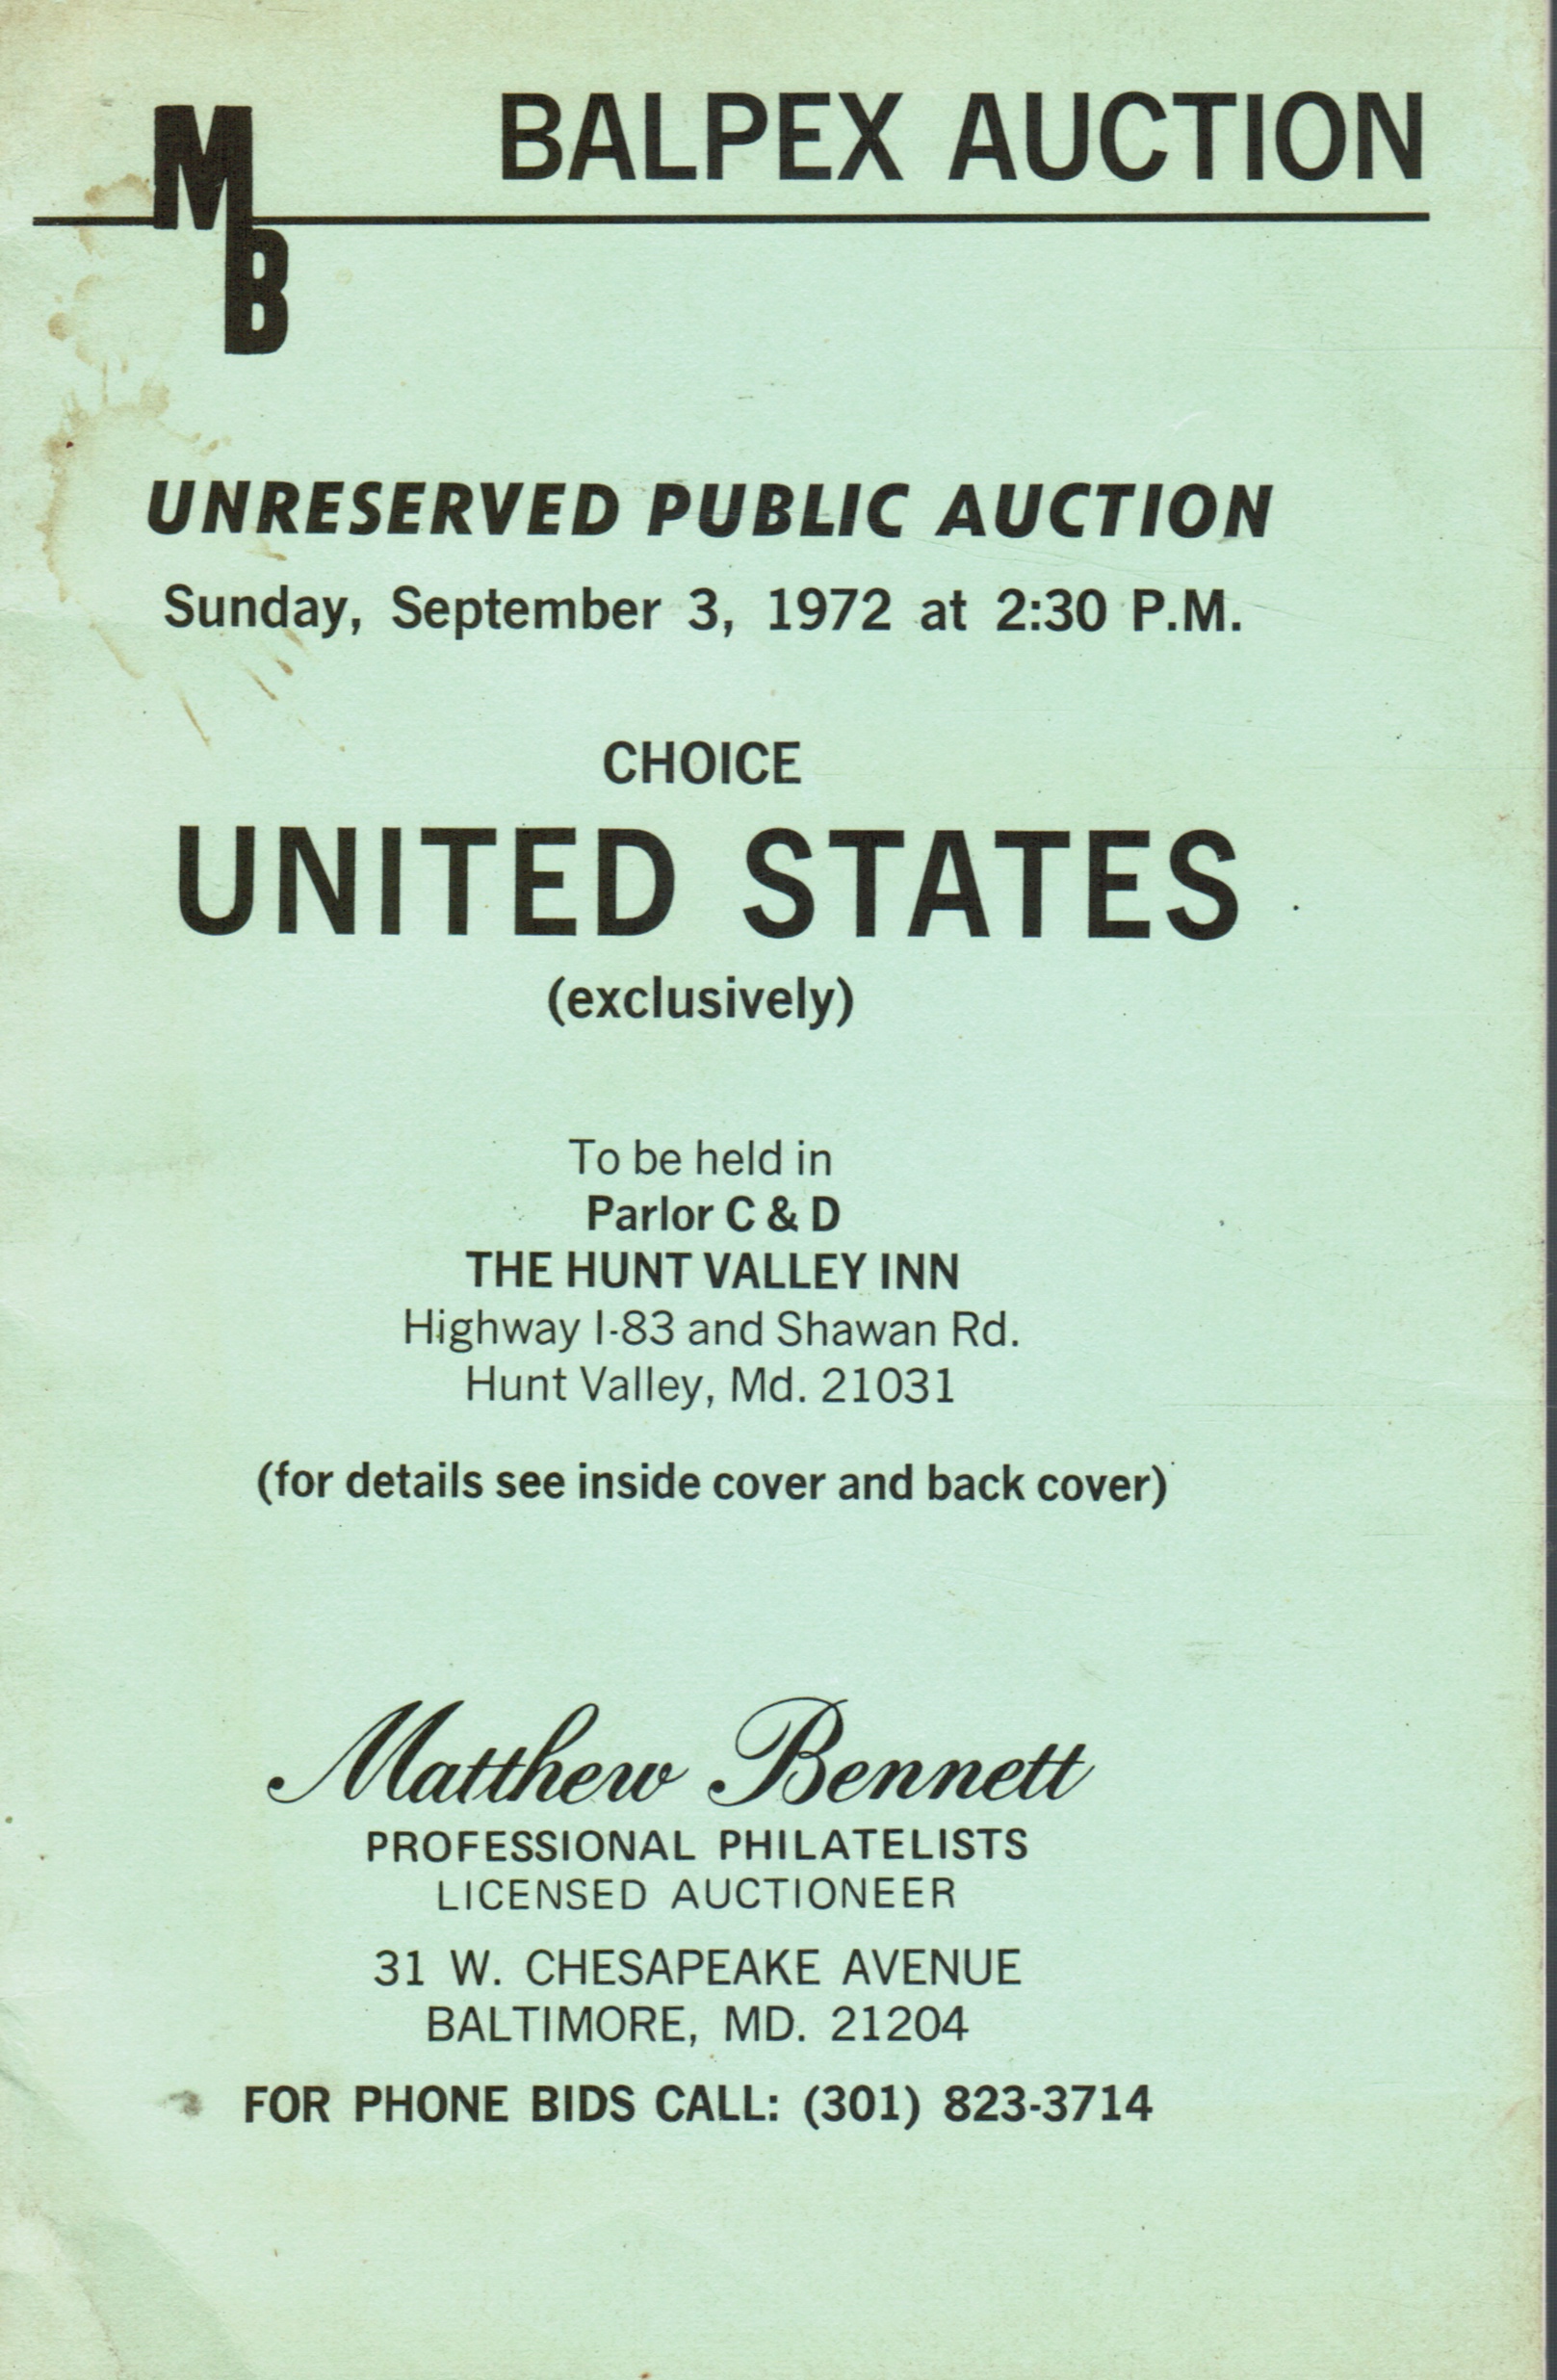 THE BALTIMORE PHILATELIC SOCEITY - Balpex Auction: September 3, 1972